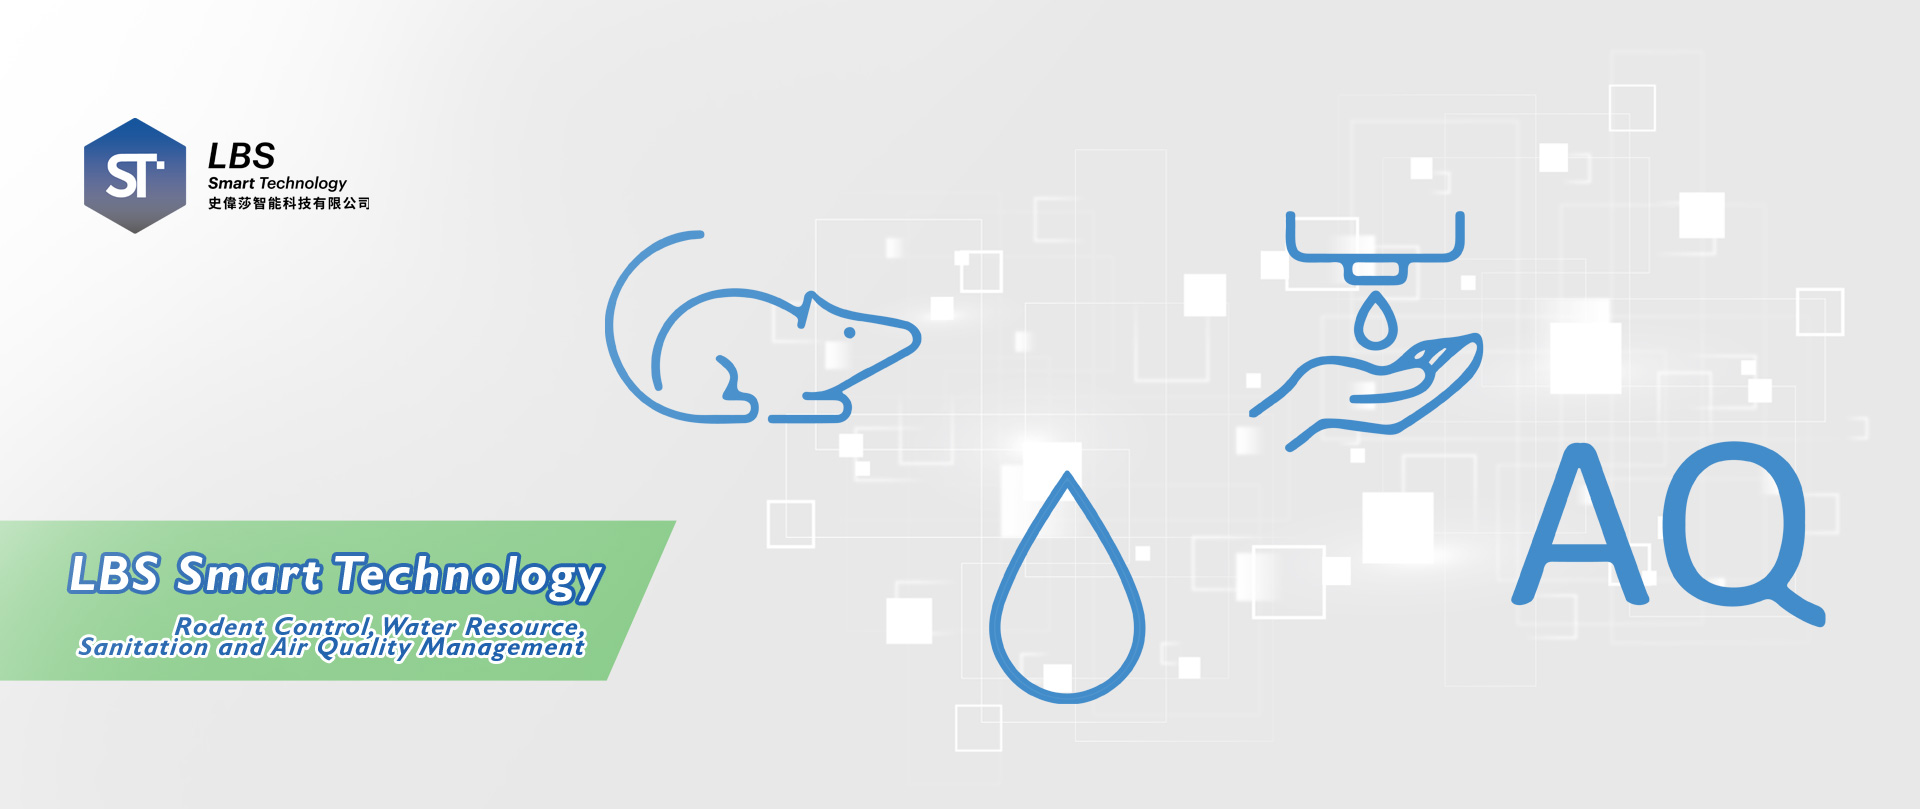 LBS Smart Technology Rodent Control, Water Resource, Sanitation and Air Quality Management